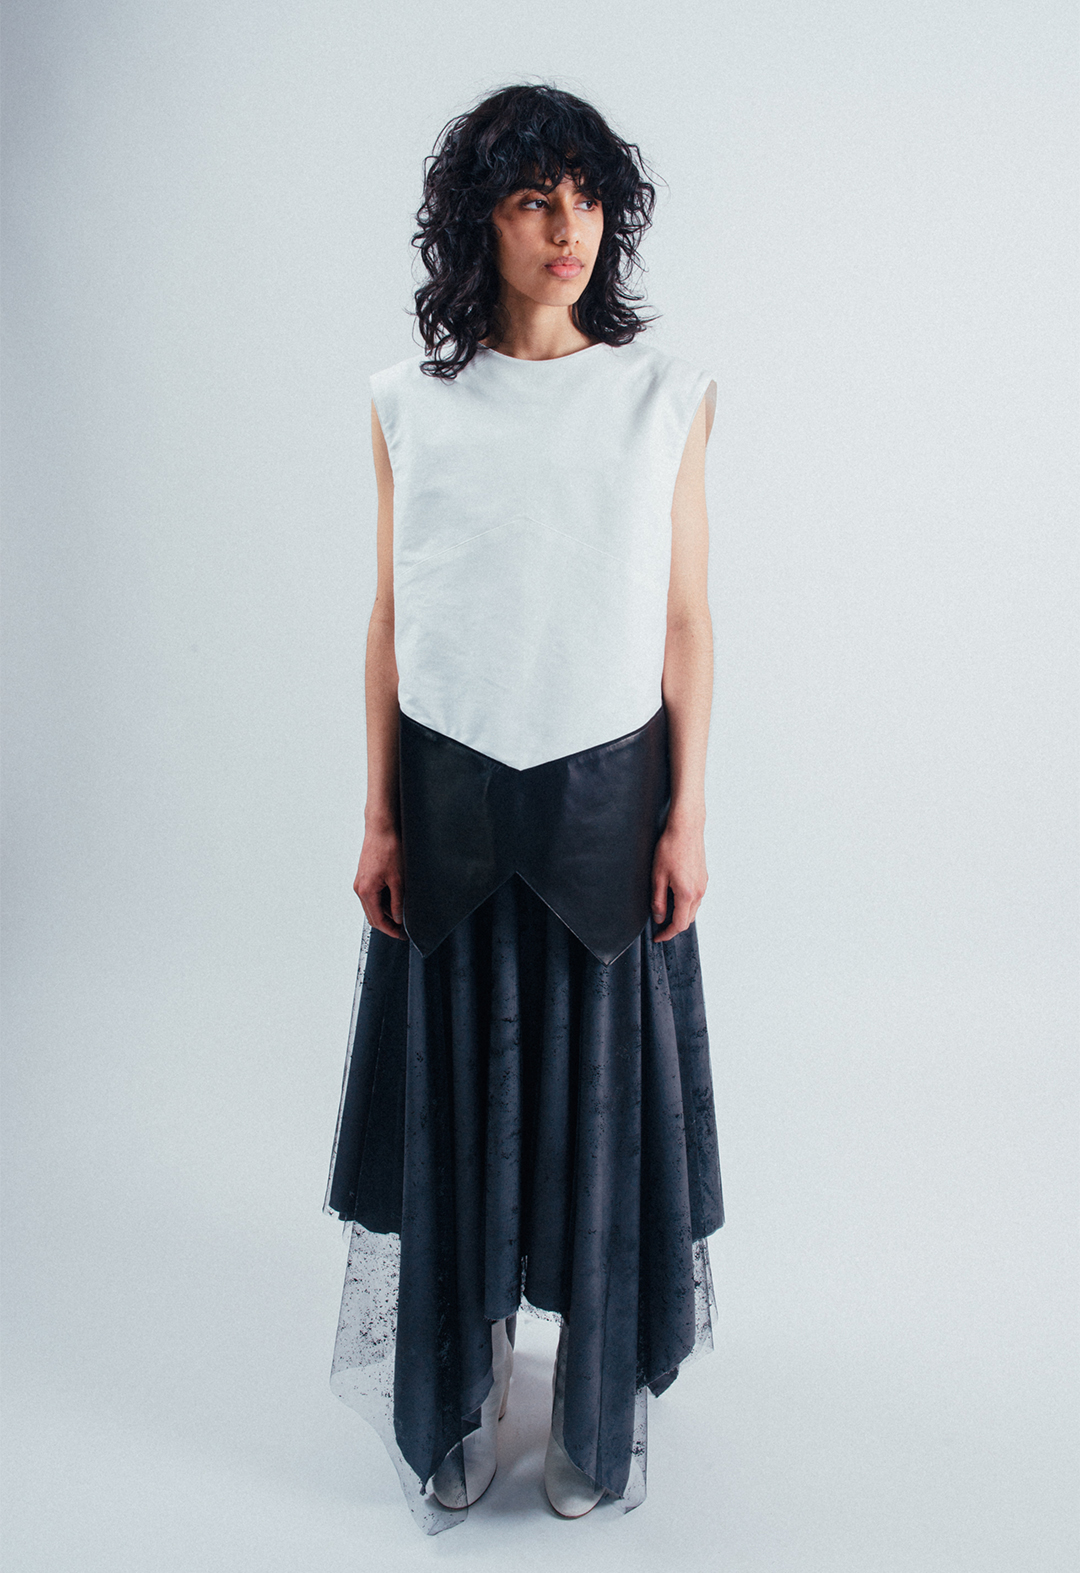 Photo of the model, Aria Puga, wearing a white cotton and black leather open-back top and a grey Tencel handkerchief skirt with black nylon tulle painted with enamel paint. The model is looking to the side. The background is white.